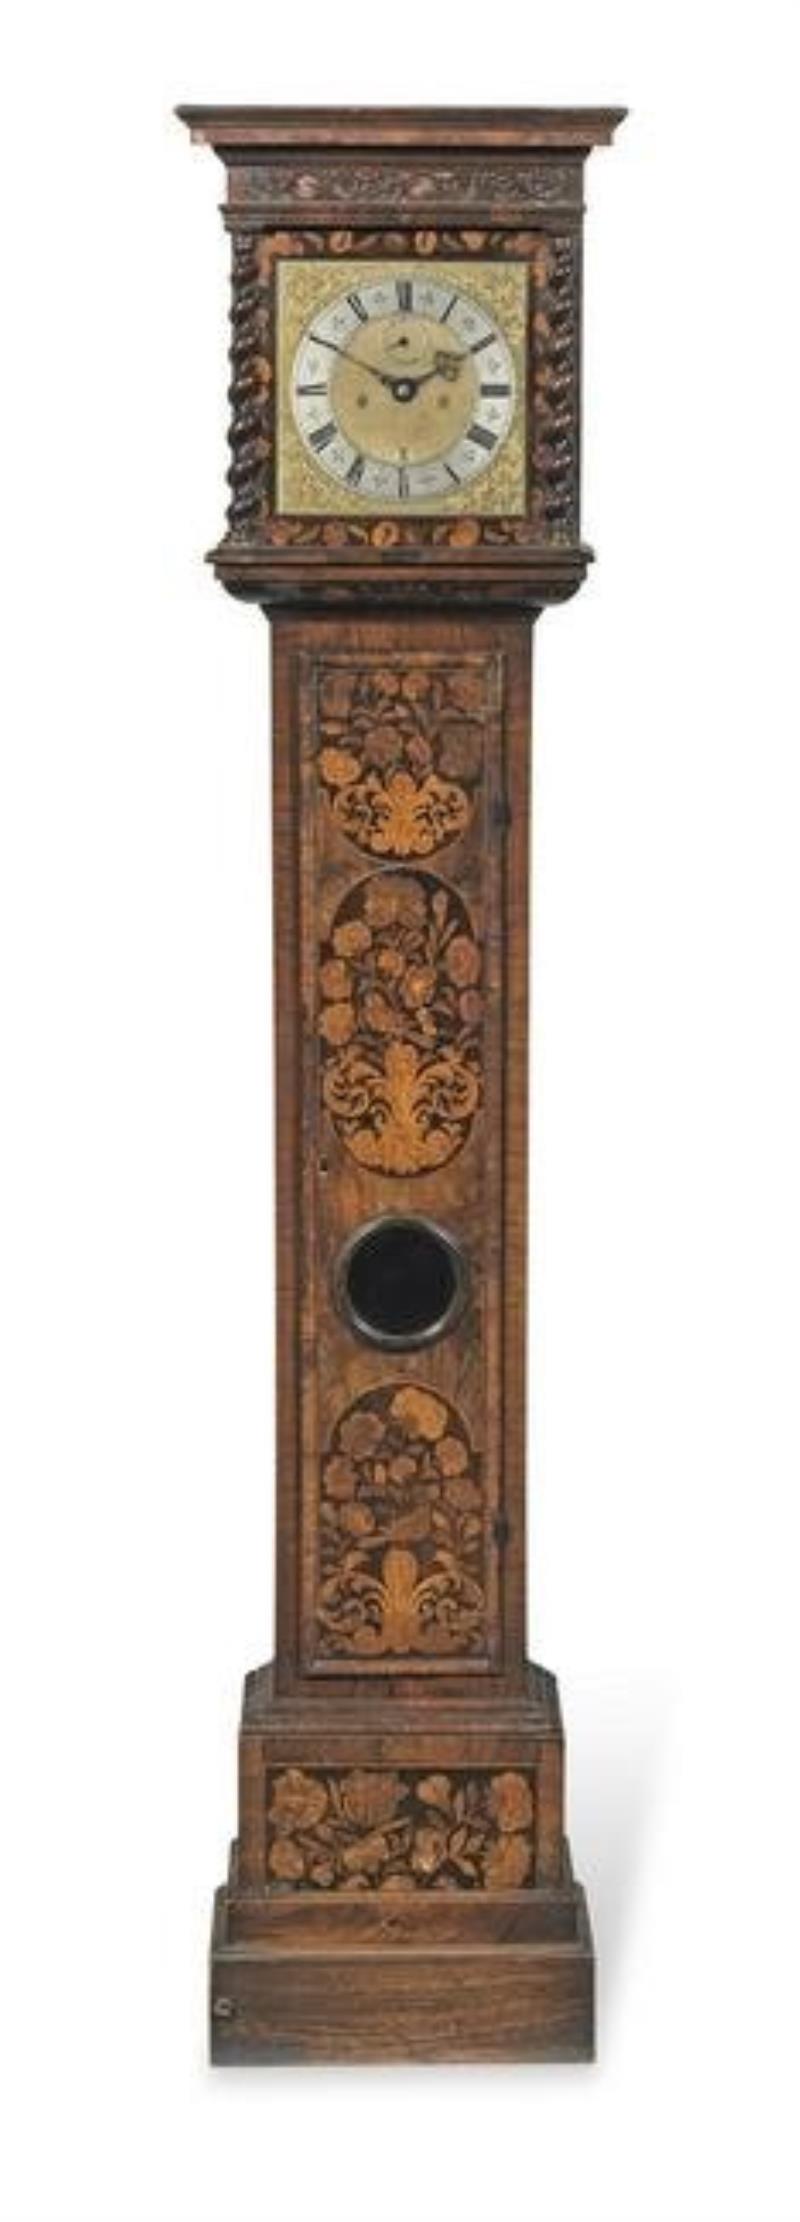 A late 17th century marquetry longcase clock with ten